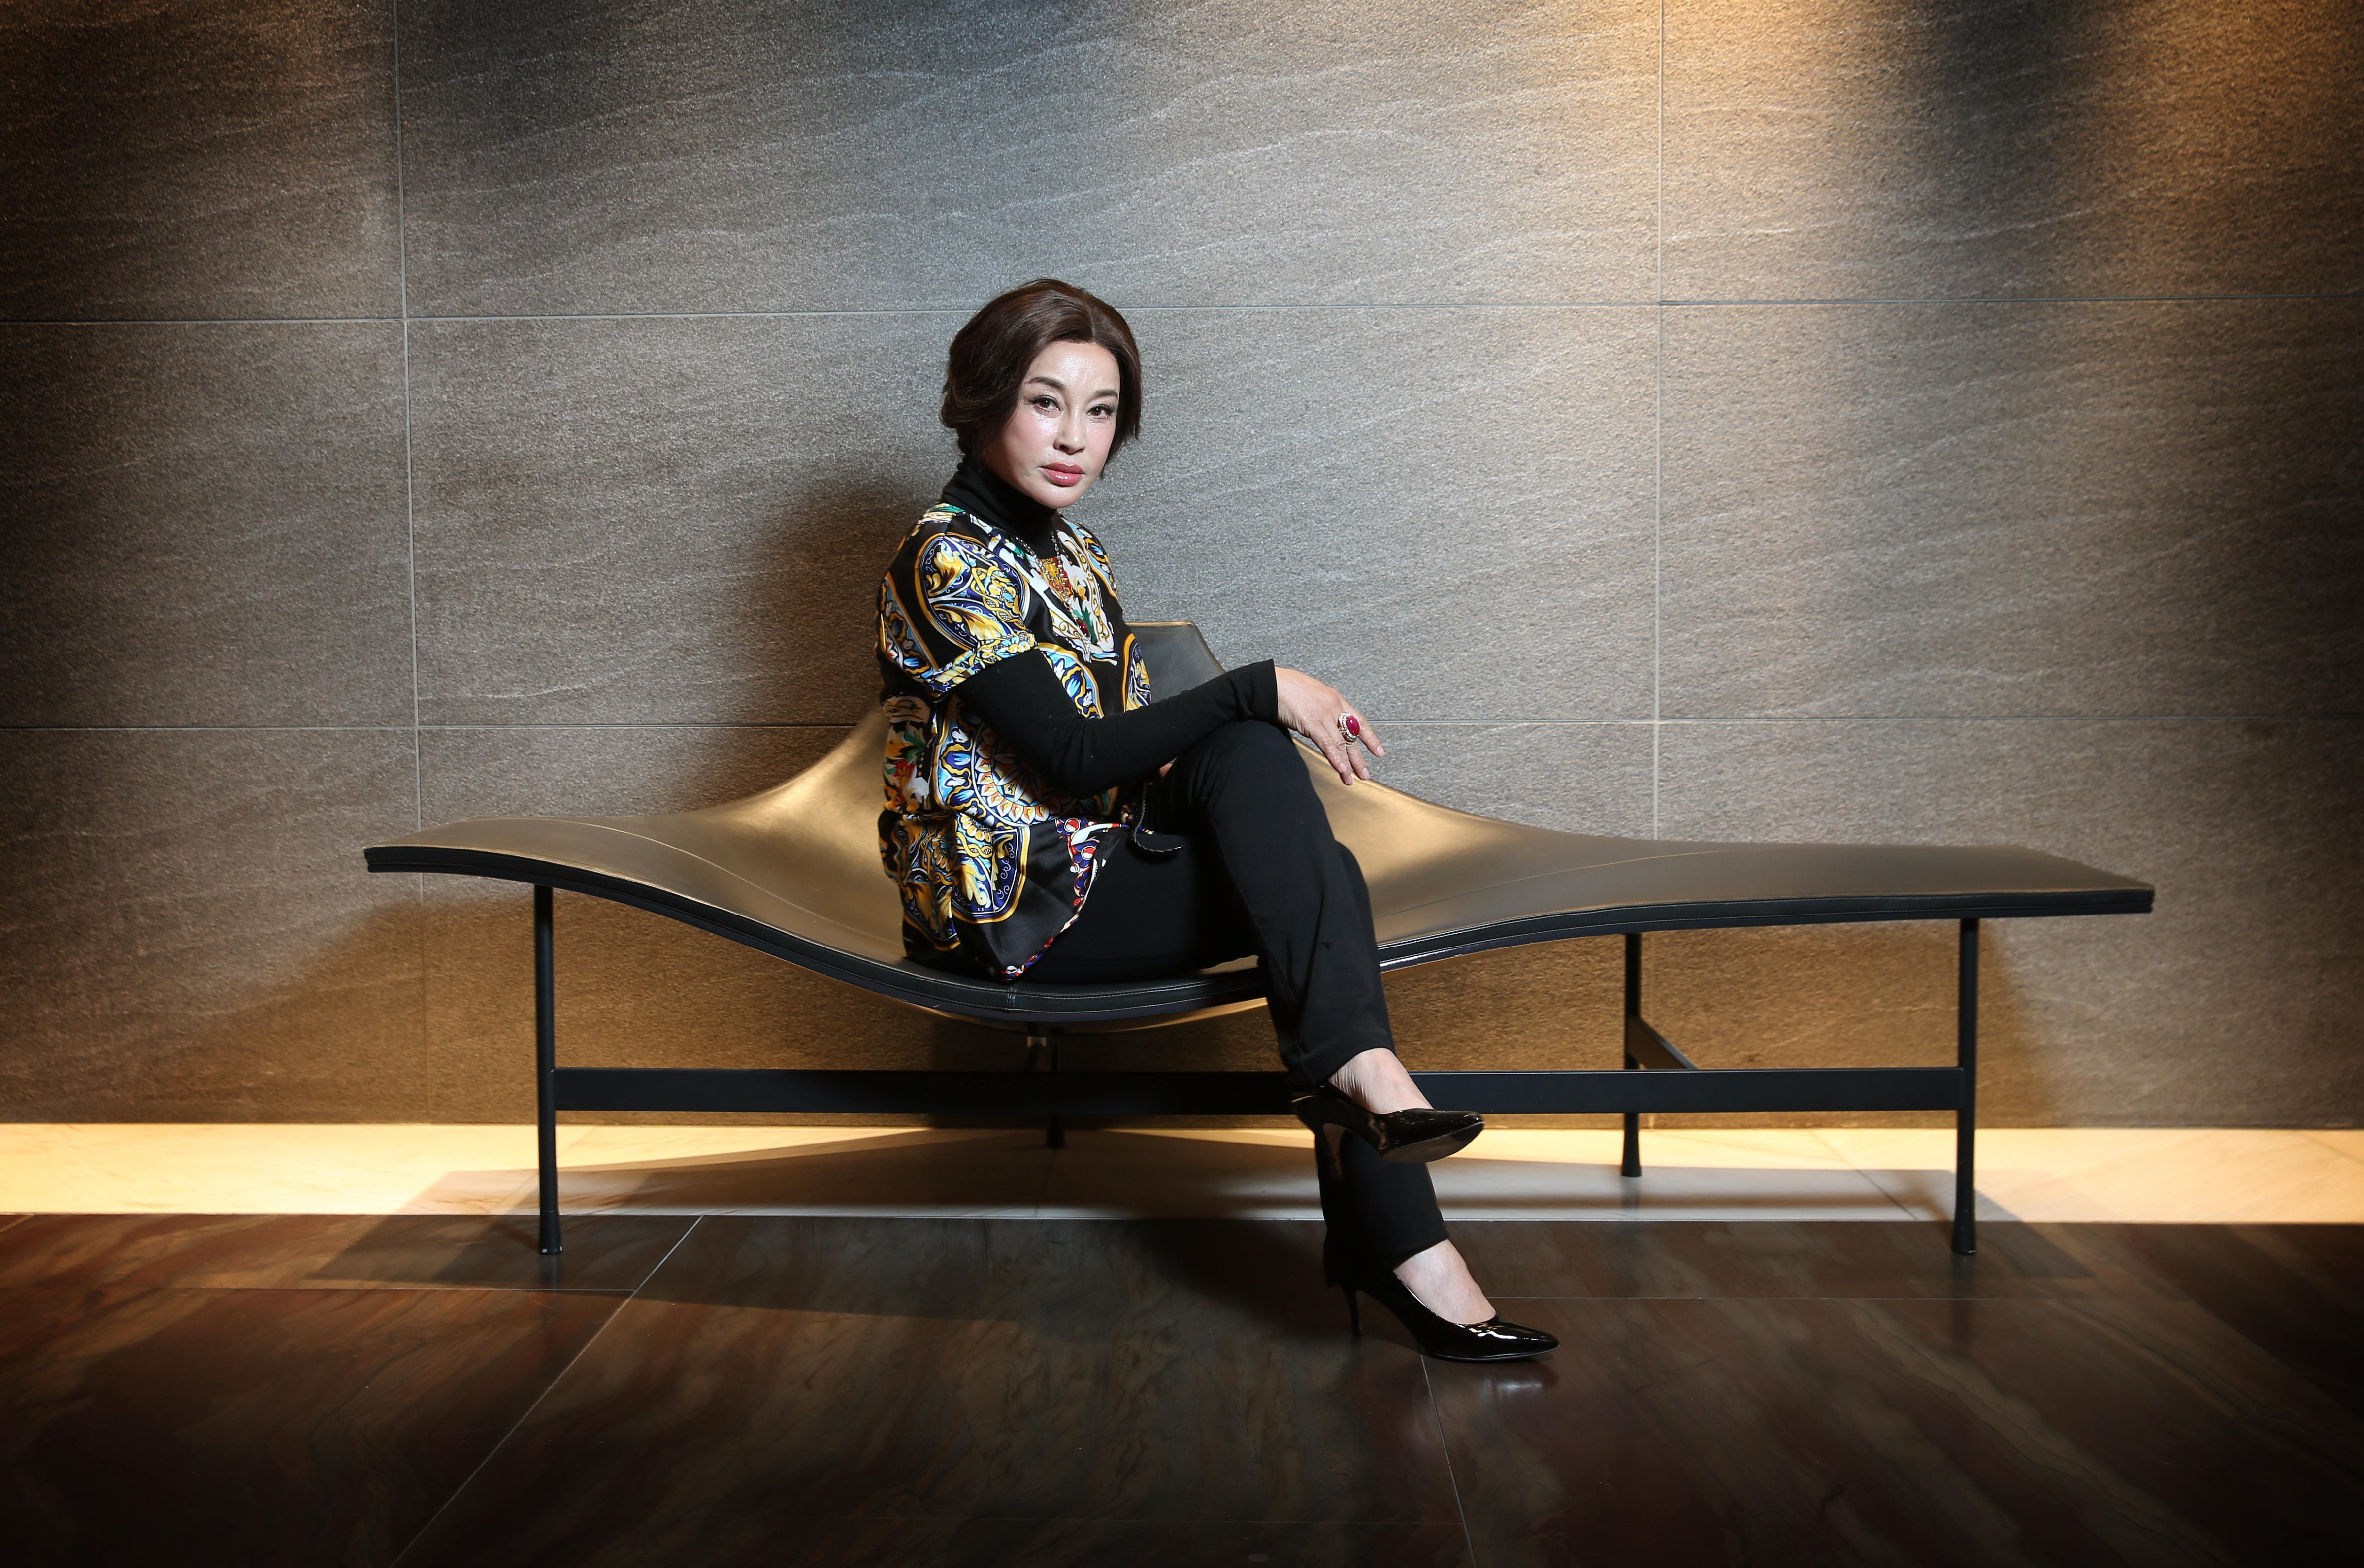 Chinese actress and businesswoman Liu Xiaoqing poses during a photo shoot at the Darling Hotel in Sydney, Australia, on July 17, 2015. (Richard Dobson/Newspix—Getty Images)